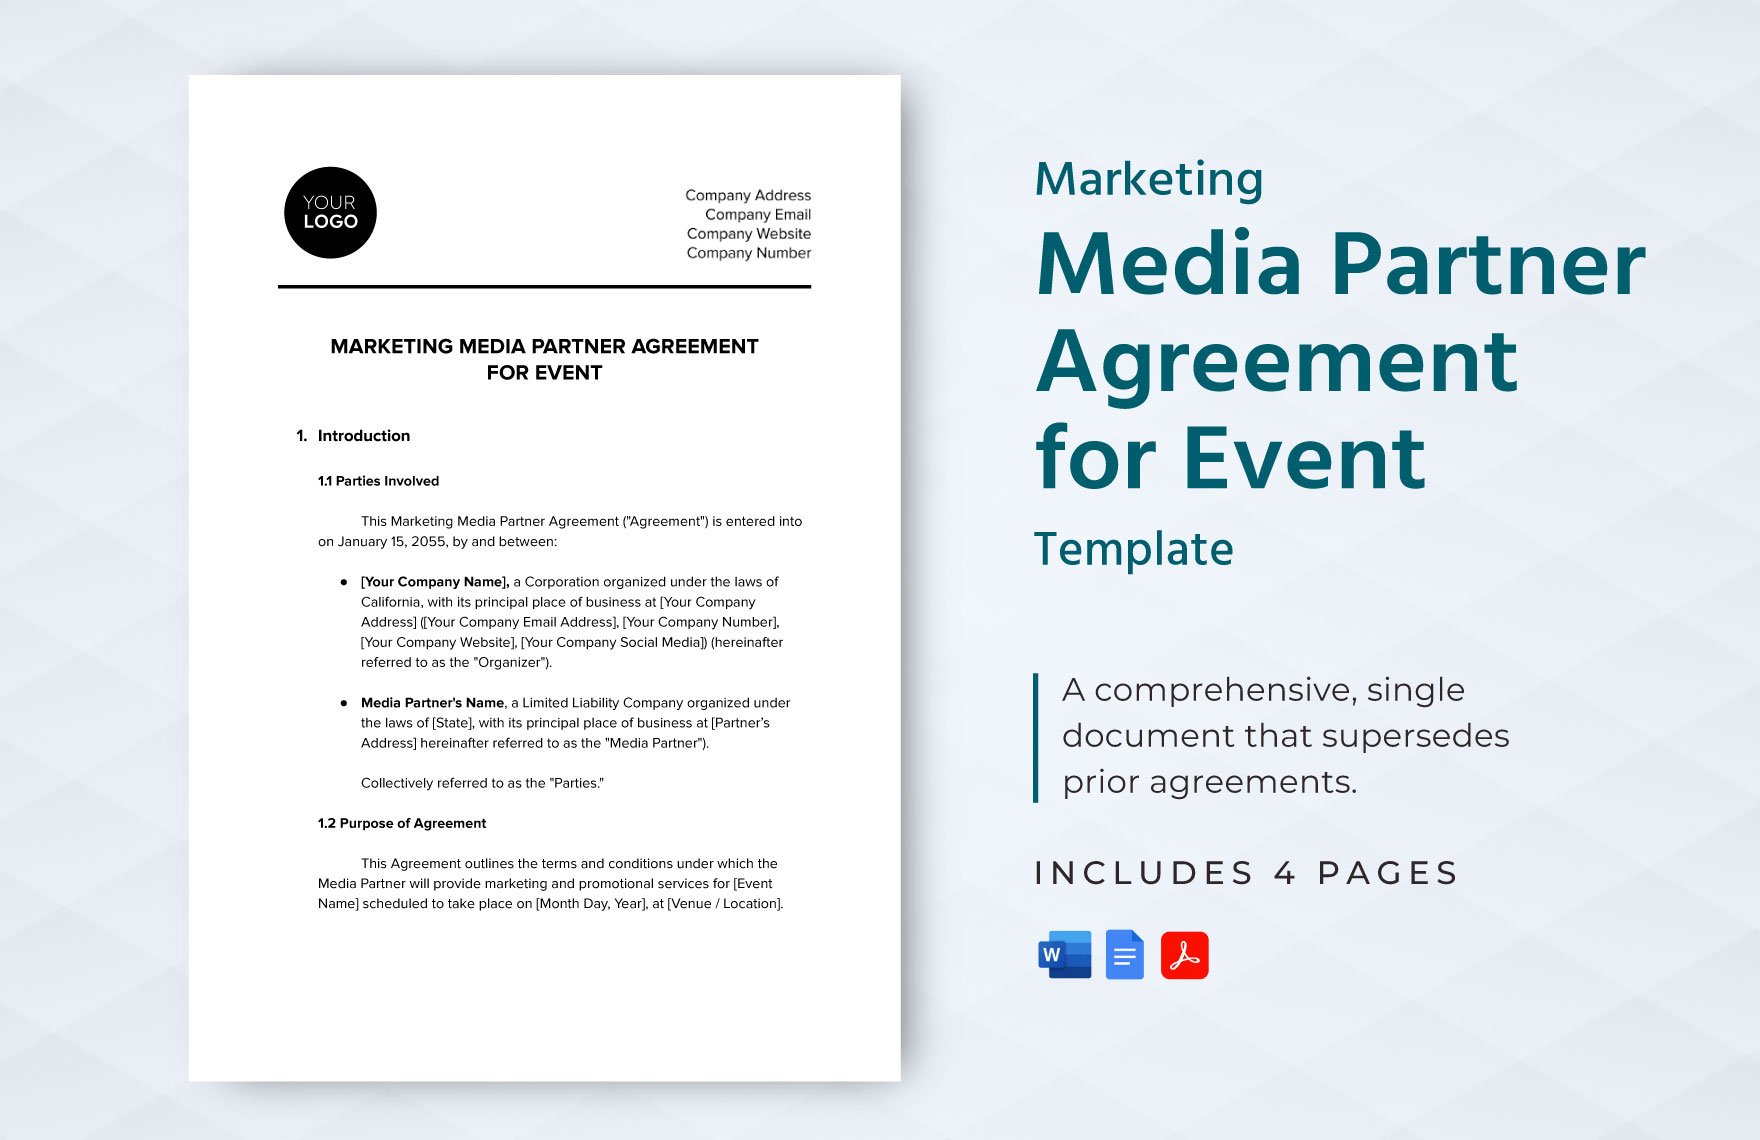 Marketing Media Partner Agreement for Event Template in Word, Google Docs, PDF